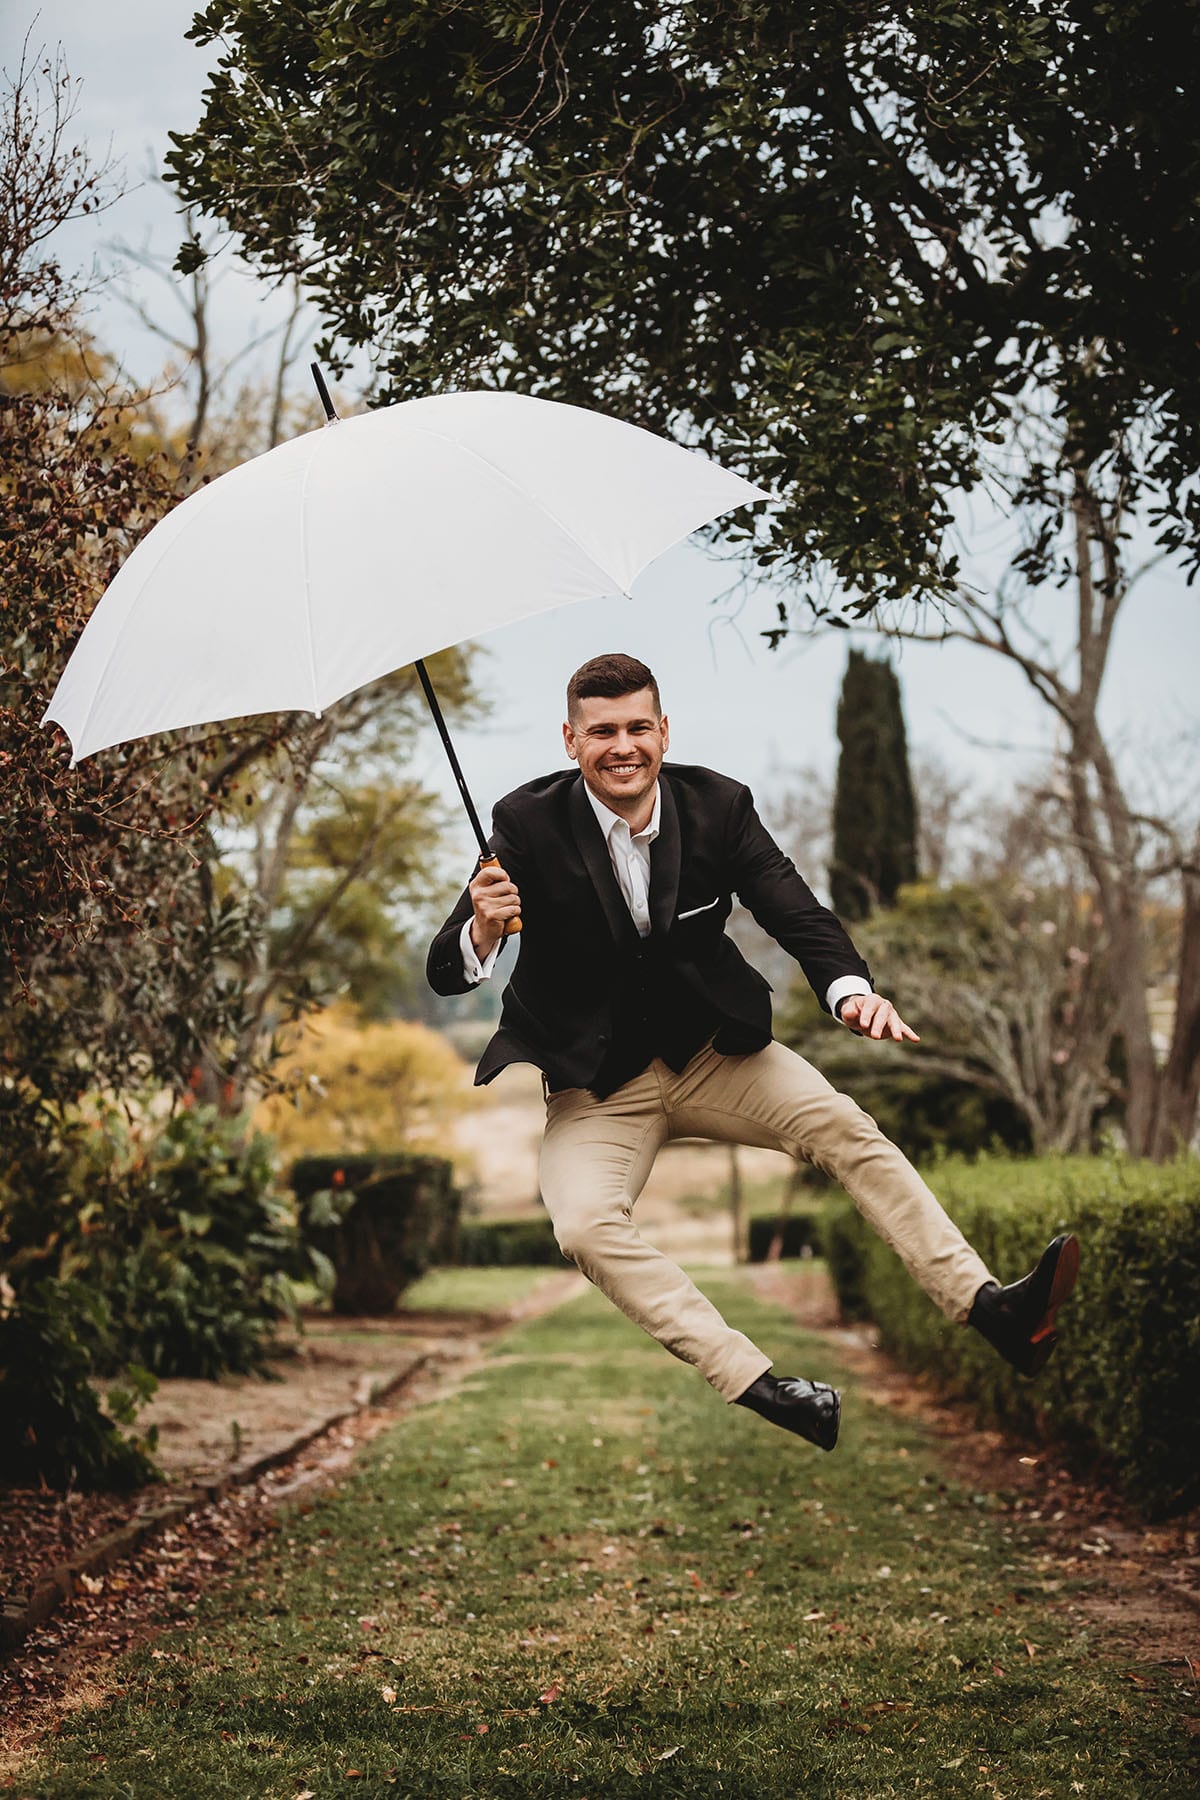 A groom holding an umbrella jumps for joy after the wedding ceremony at Gledswood Estate